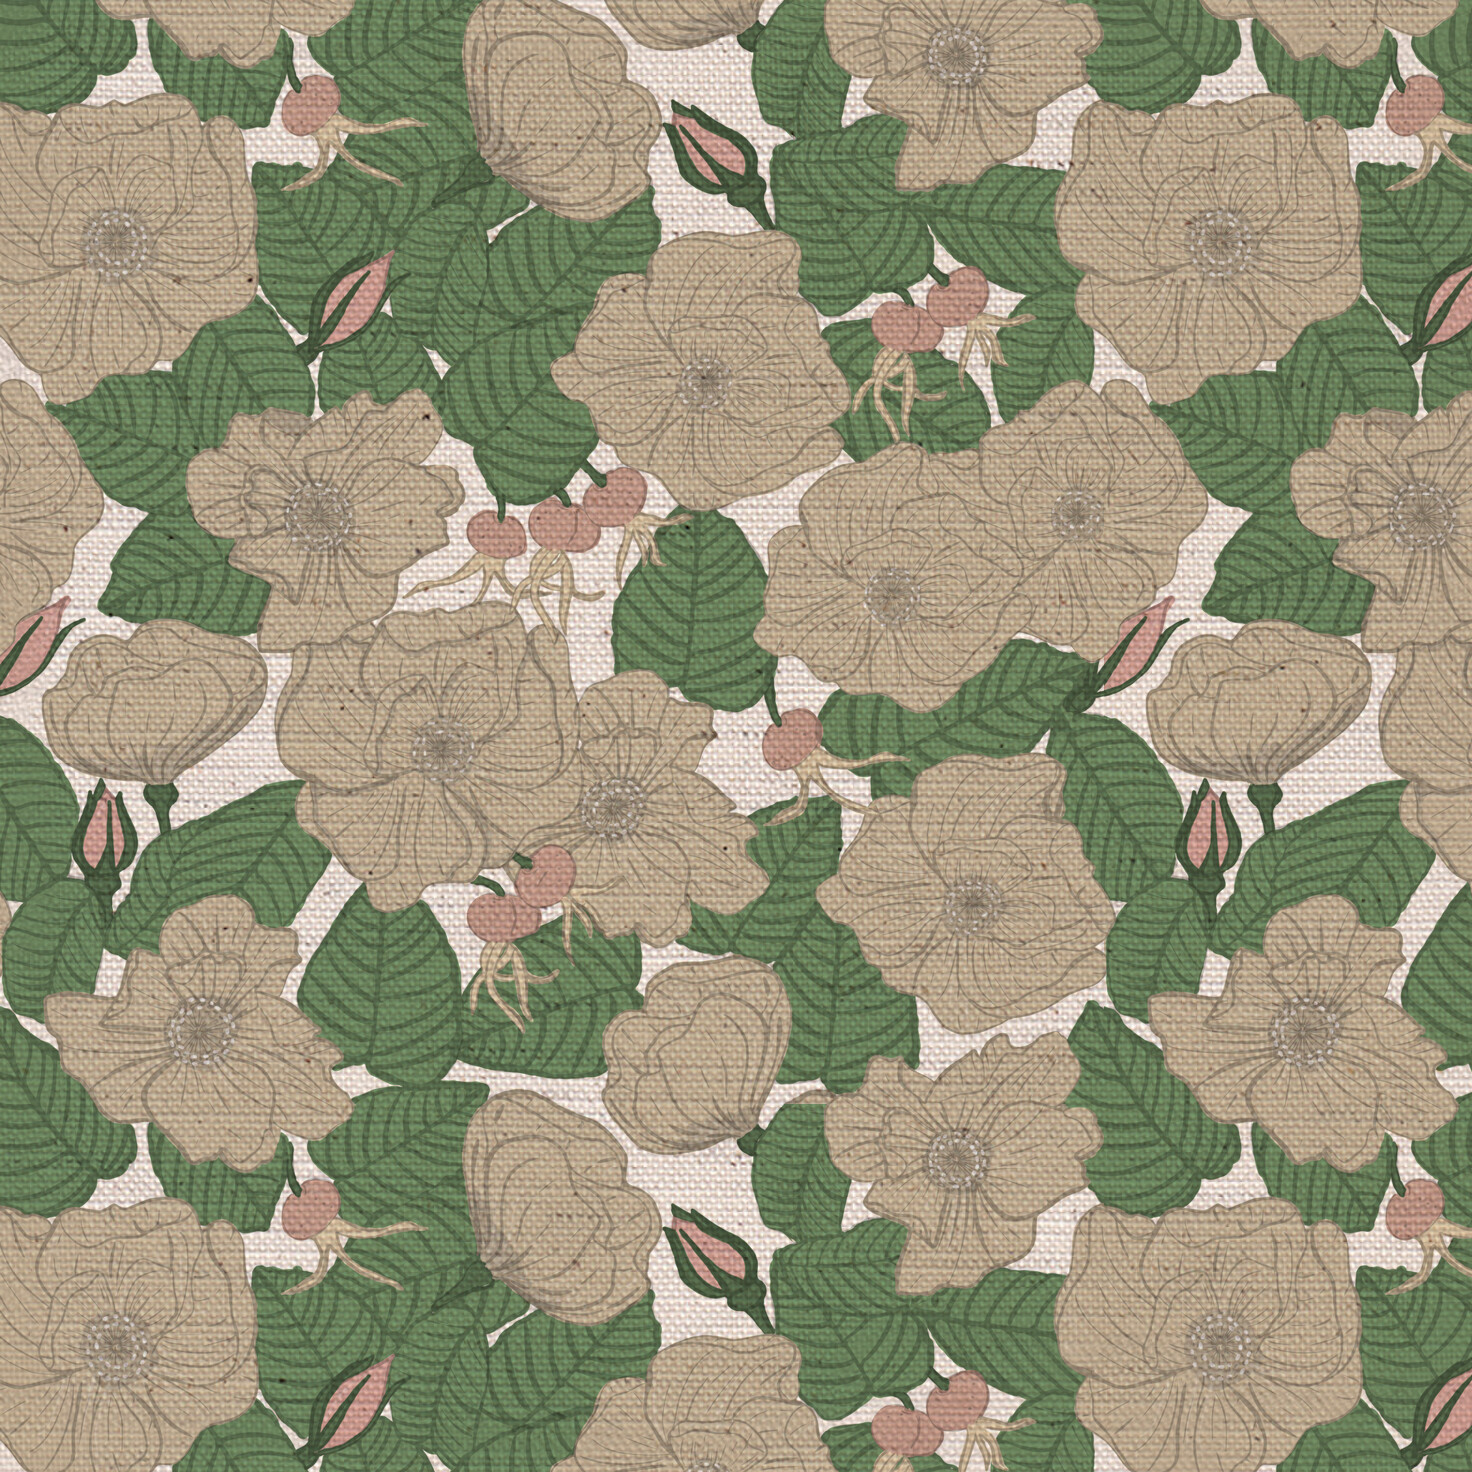 Petite Rose Garden Fabric in Peace on Natural Background